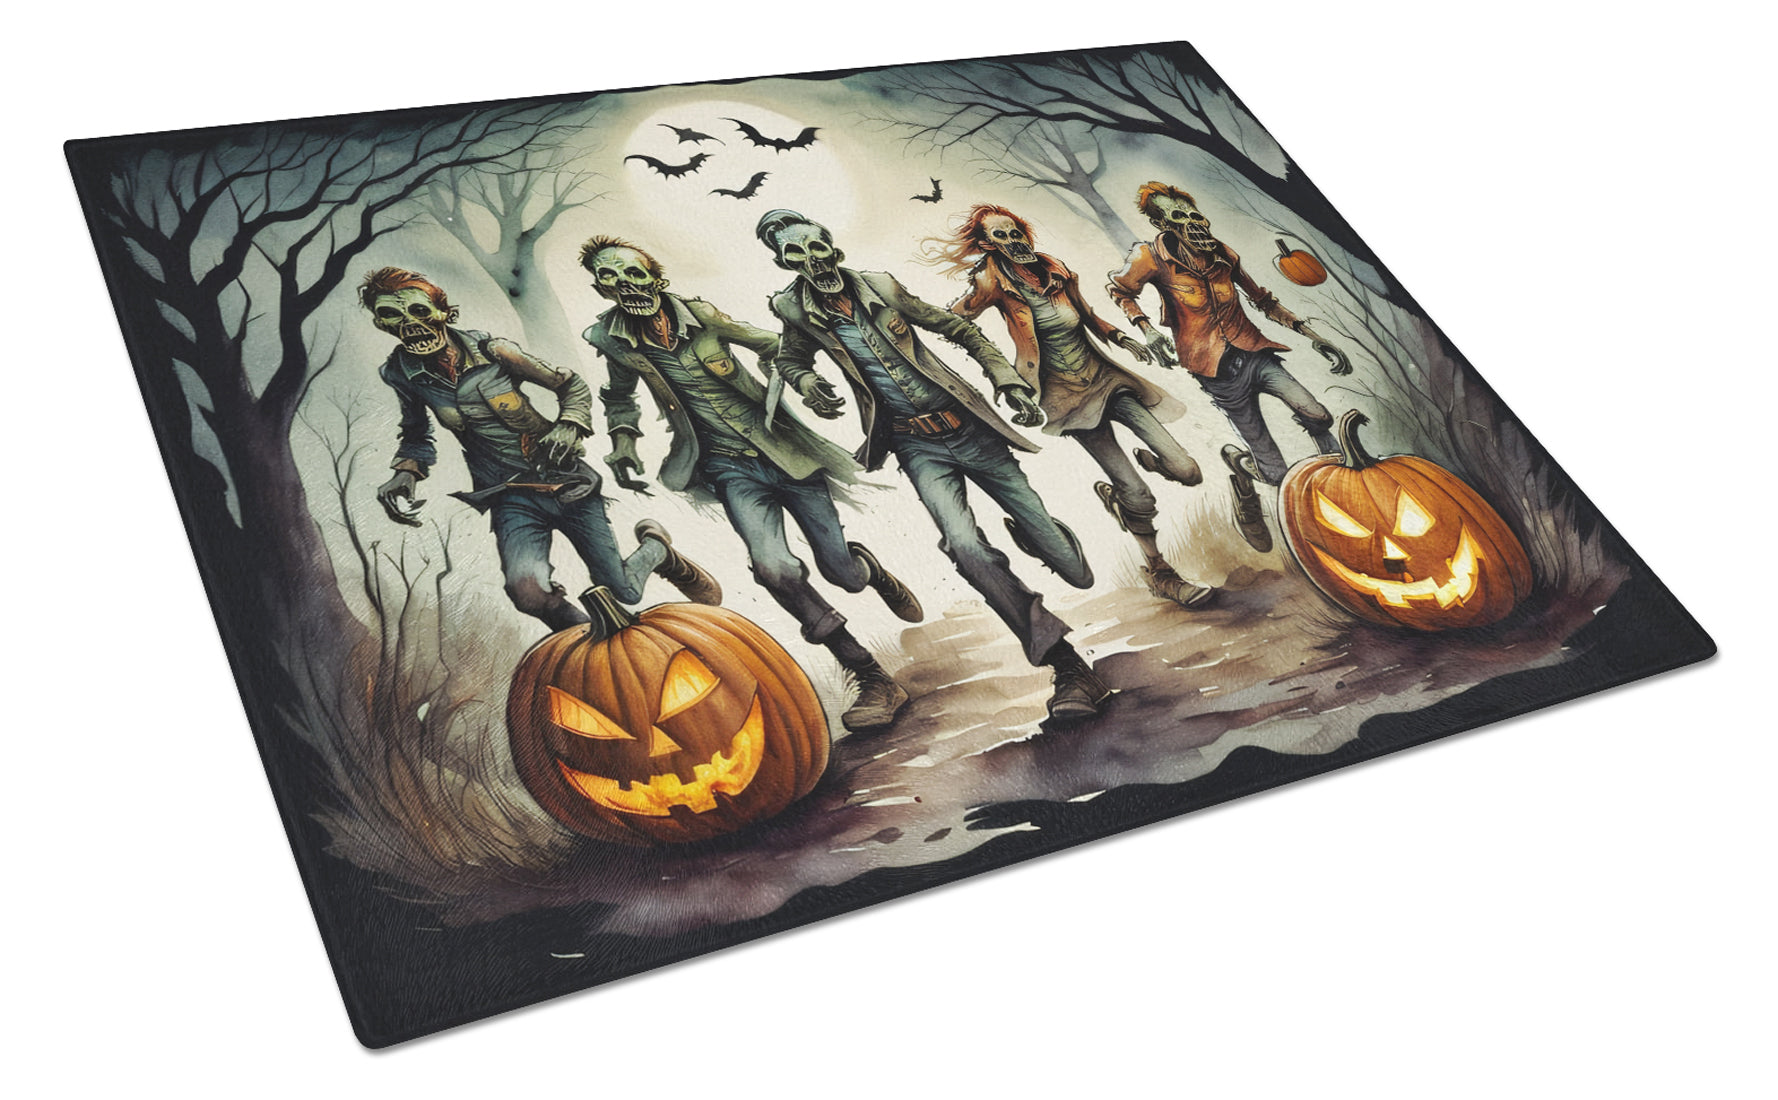 Buy this Zombies Spooky Halloween Glass Cutting Board Large